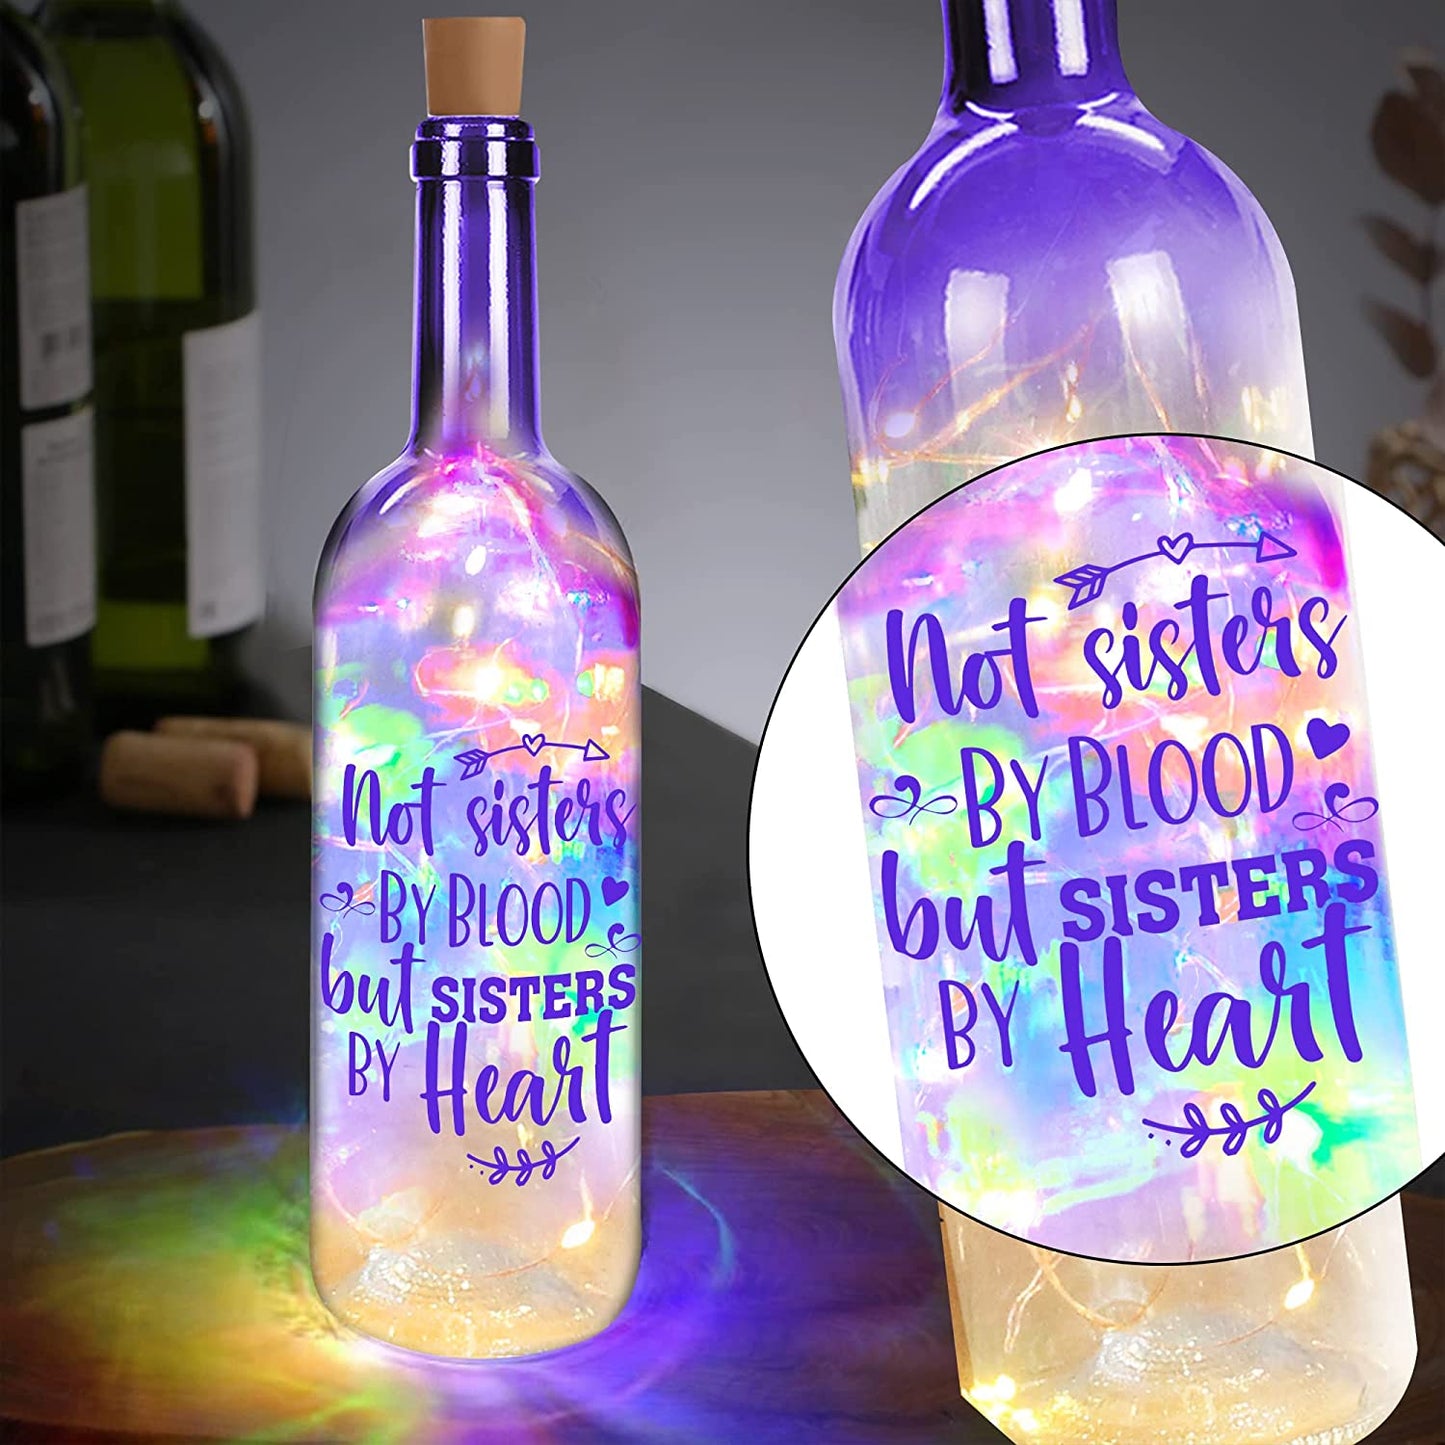 Gifts for Women Friends - Room Decor - Birthday Party Decorations - Friend Birthday Gifts for Women Friends Female for Friends - Fairy Wine Bottle Lights with Cork